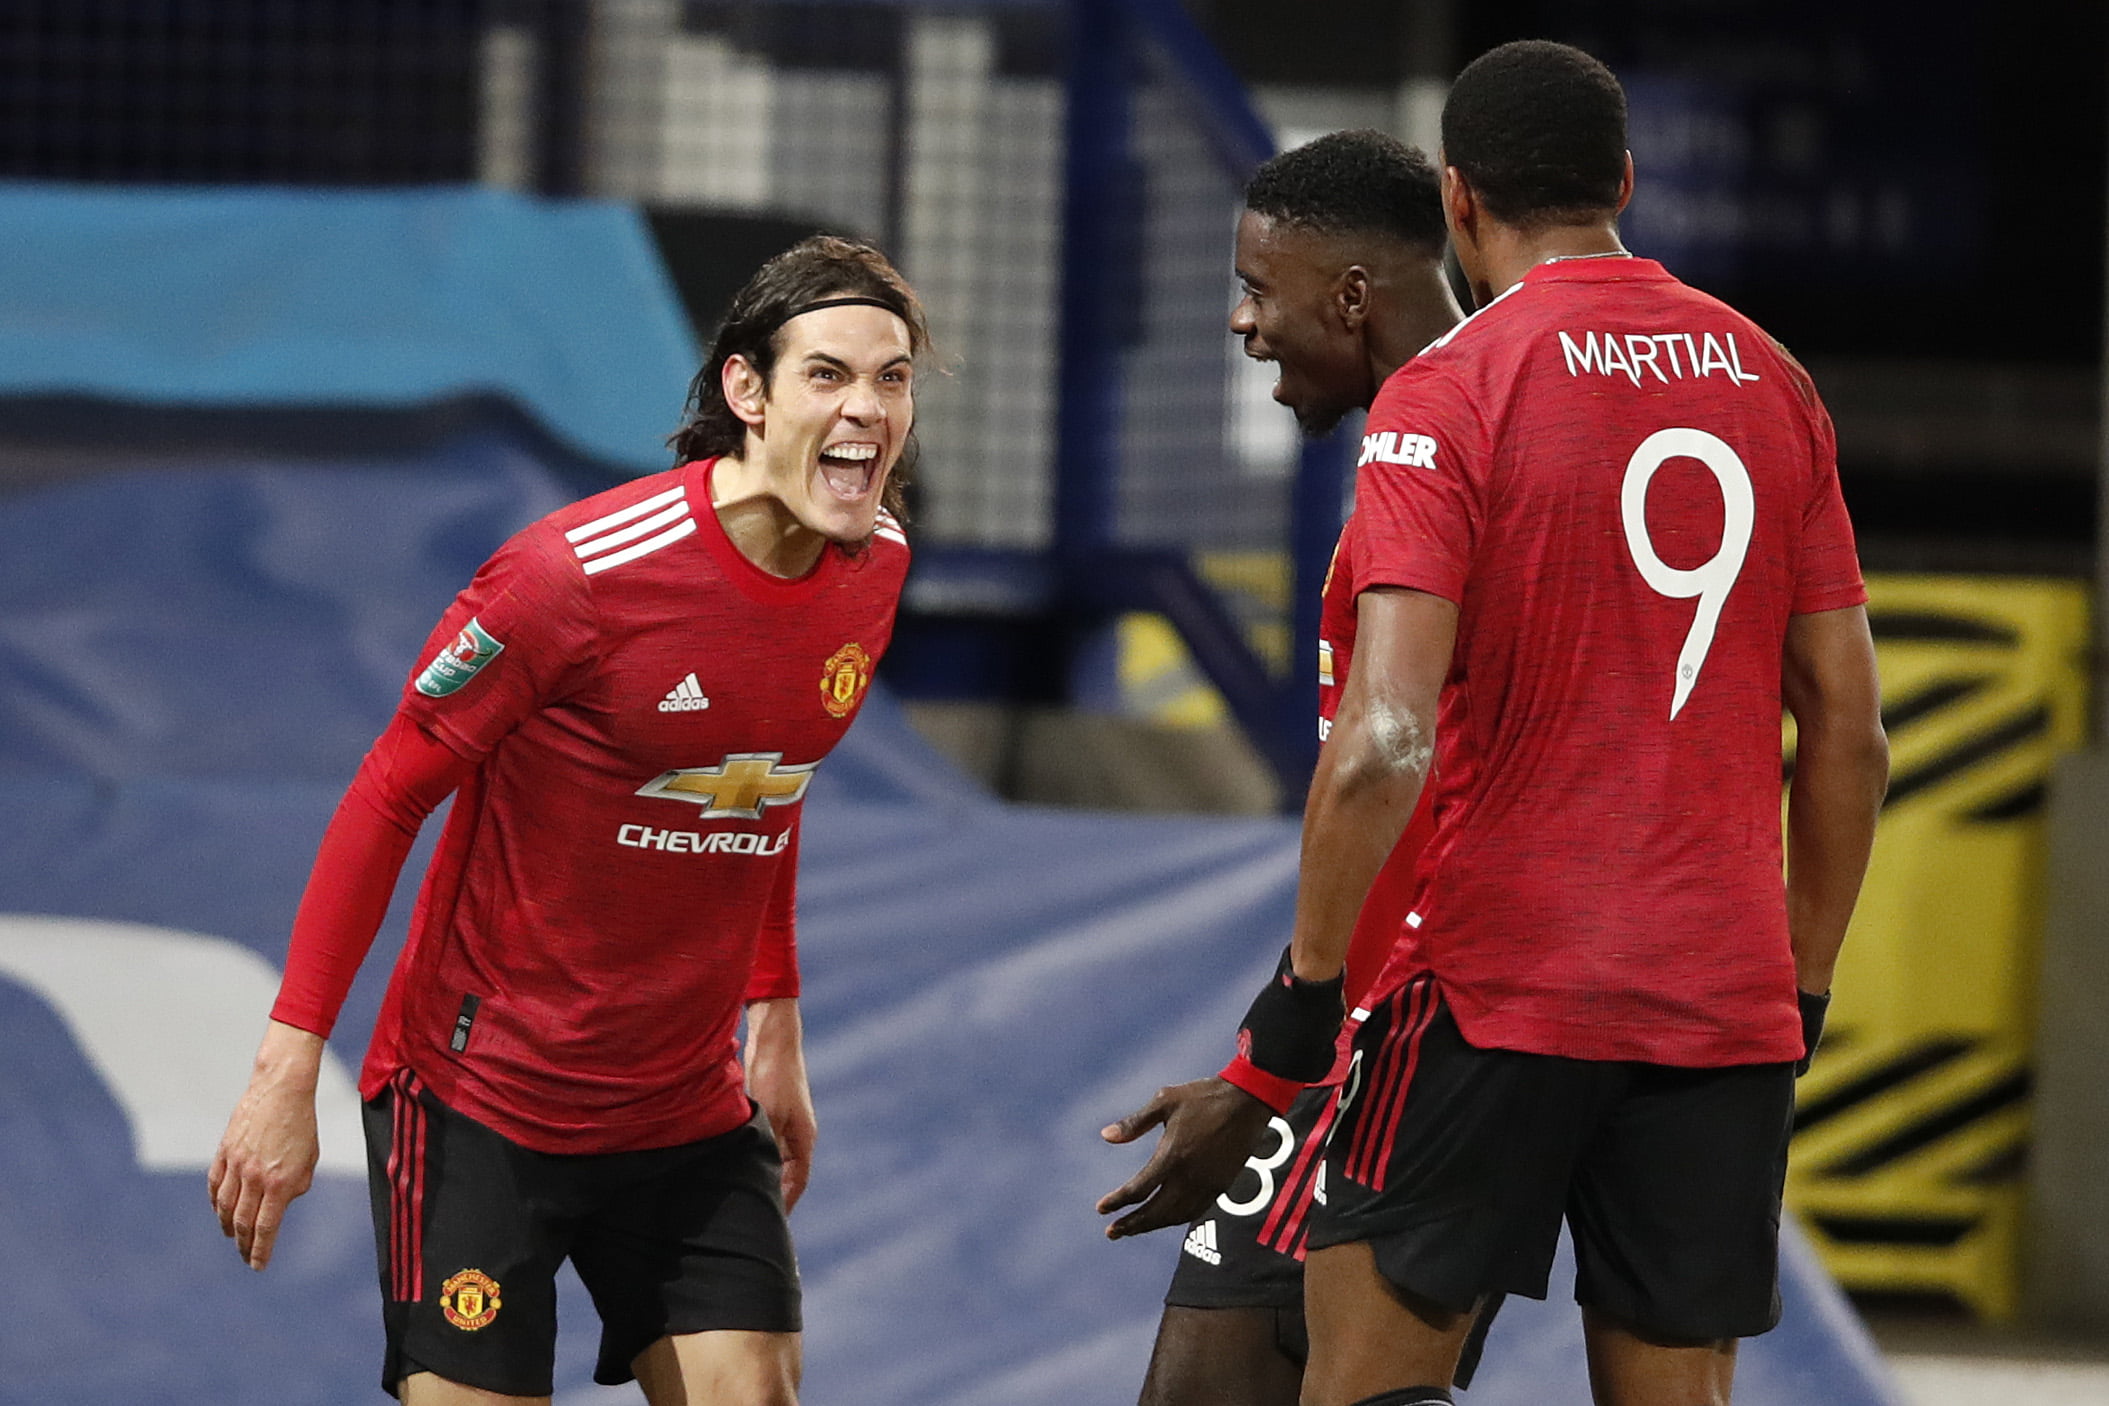 Edinson Cavani (l) of Manchester United celebrates with team mates Axel Tuanzebe and Anthony Martial (r) after scoring their sides first goal during the Carabao Cup Quarter Final match between Everton and Manchester United at Goodison Park on December 23, 2020 in Liverpool, England. (Photo by Clive Brunskill/Getty Images)